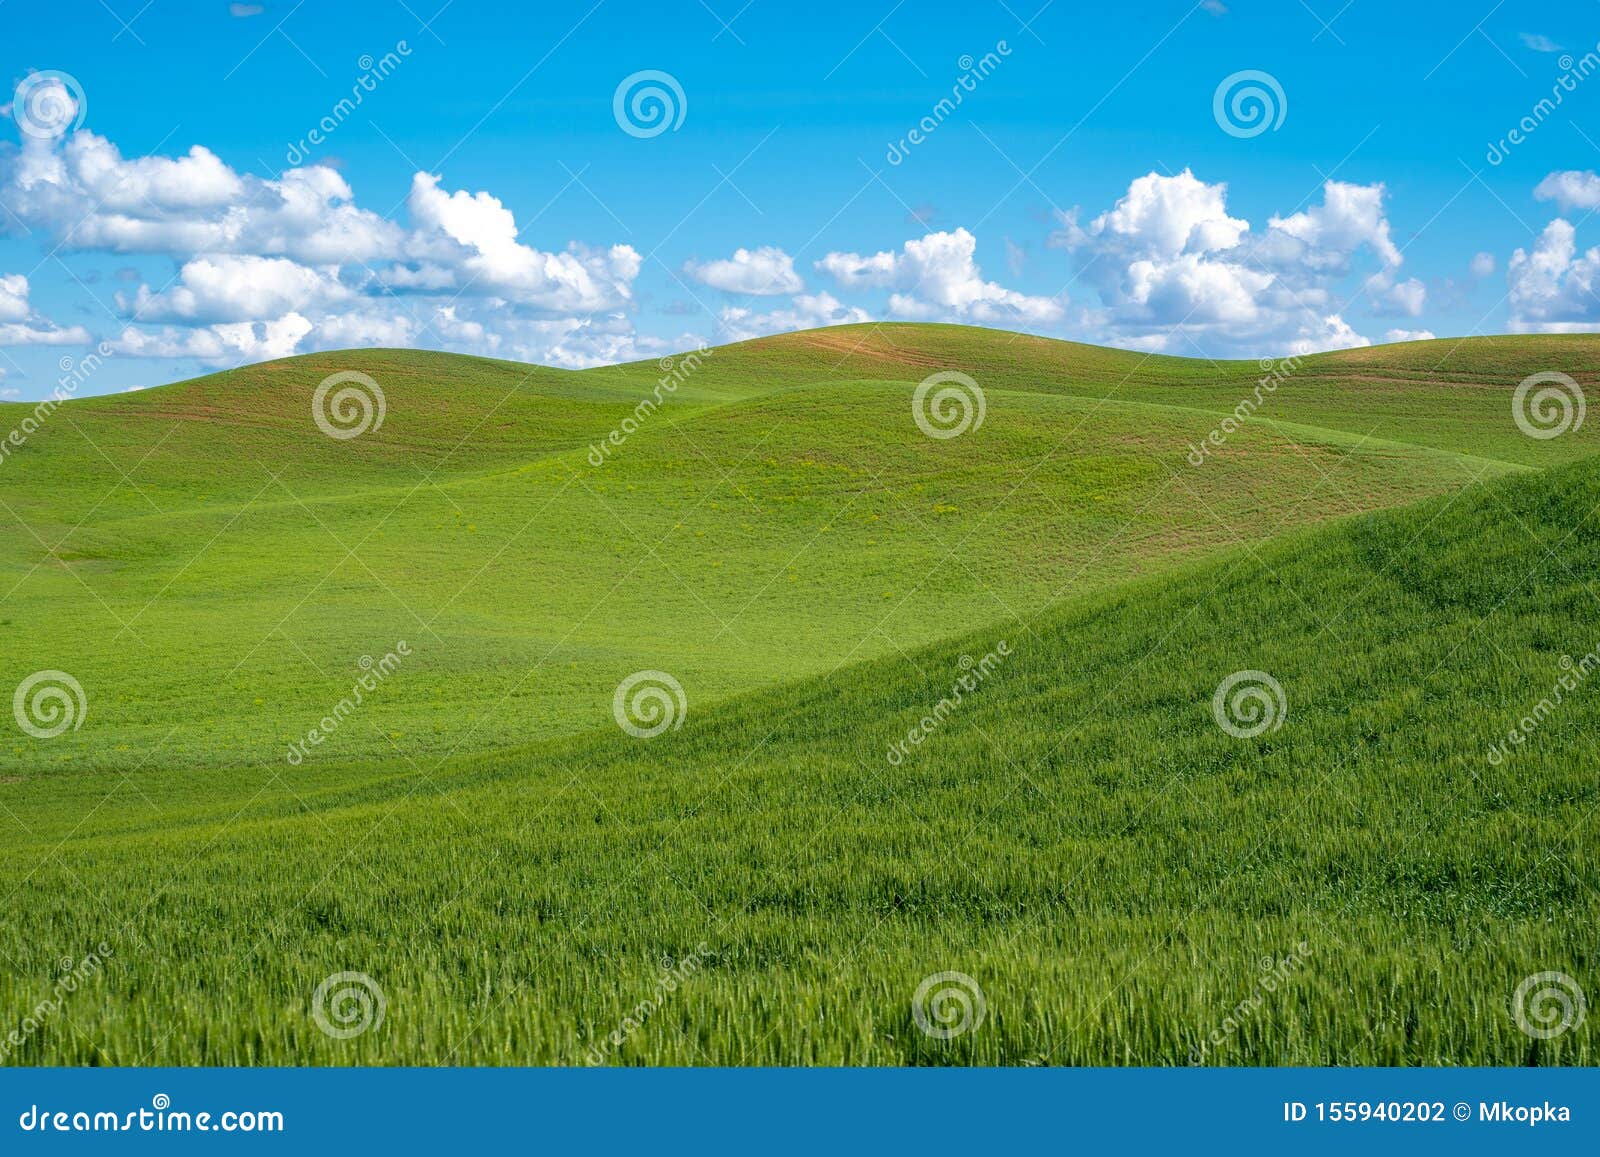 Sunny Summer Day in the Rolling Green Grass Hills of the Palouse in